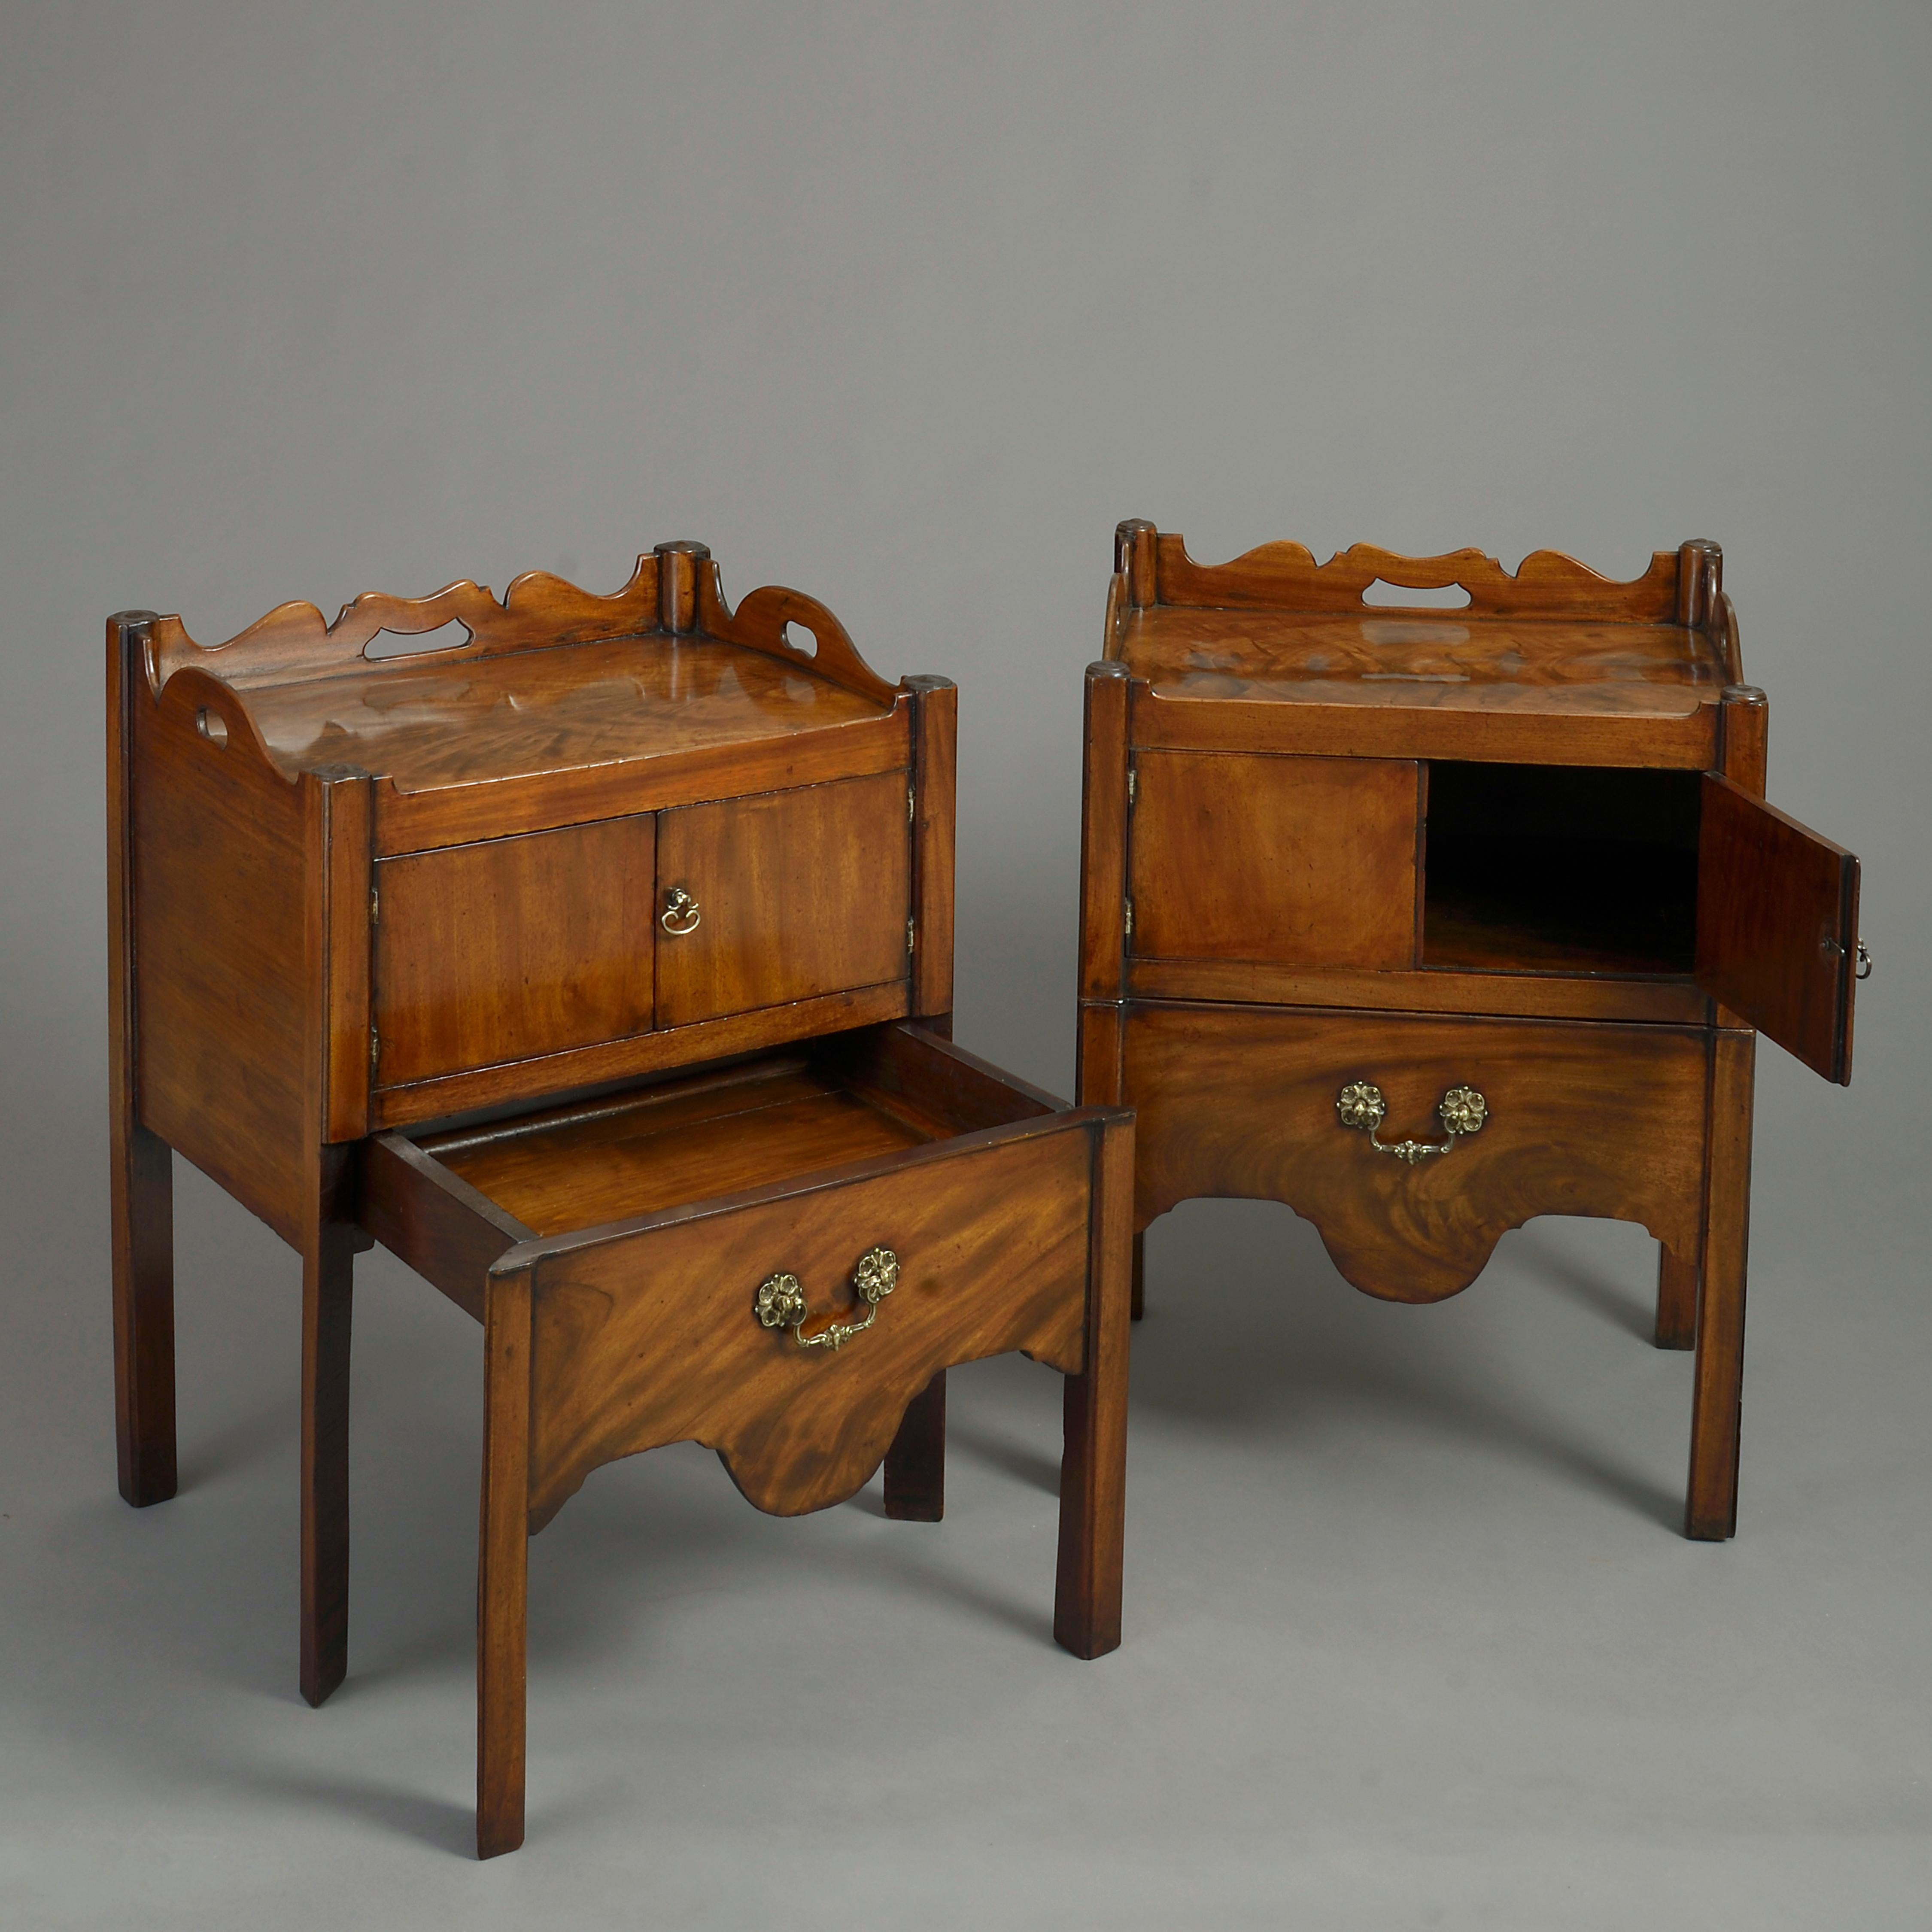 A pair of mid-18th century George III period mahogany bedside commodes or night stands, each having a finely figured galleried top with pierced carrying handles above two cupboard doors, the lower section with shaped apron, opening to reveal a